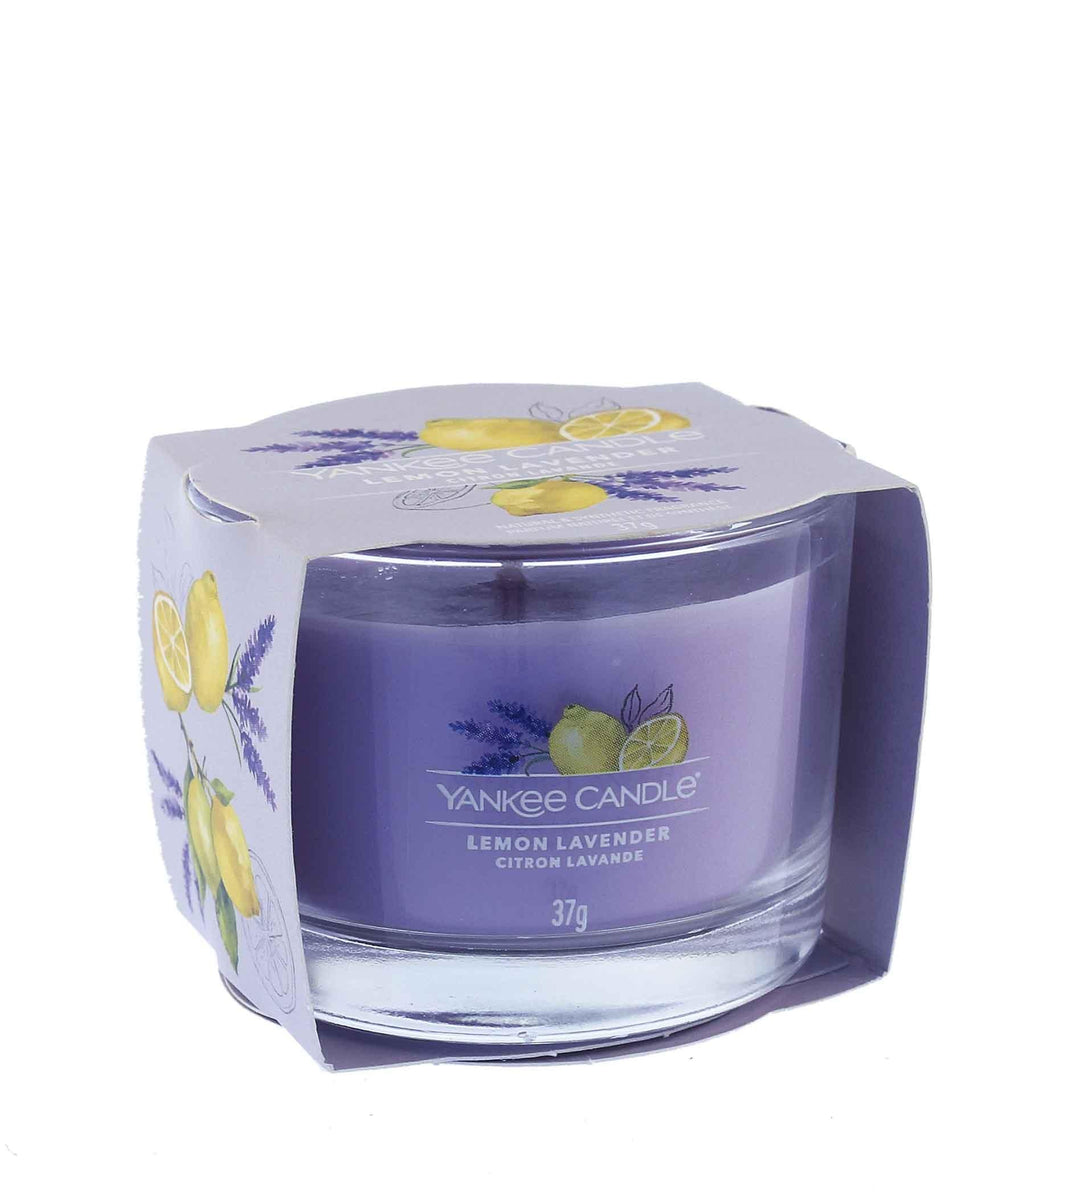 YANKEE CANDLE Lemon Lavender Votive Candle In Glass 37 G - Parfumby.com